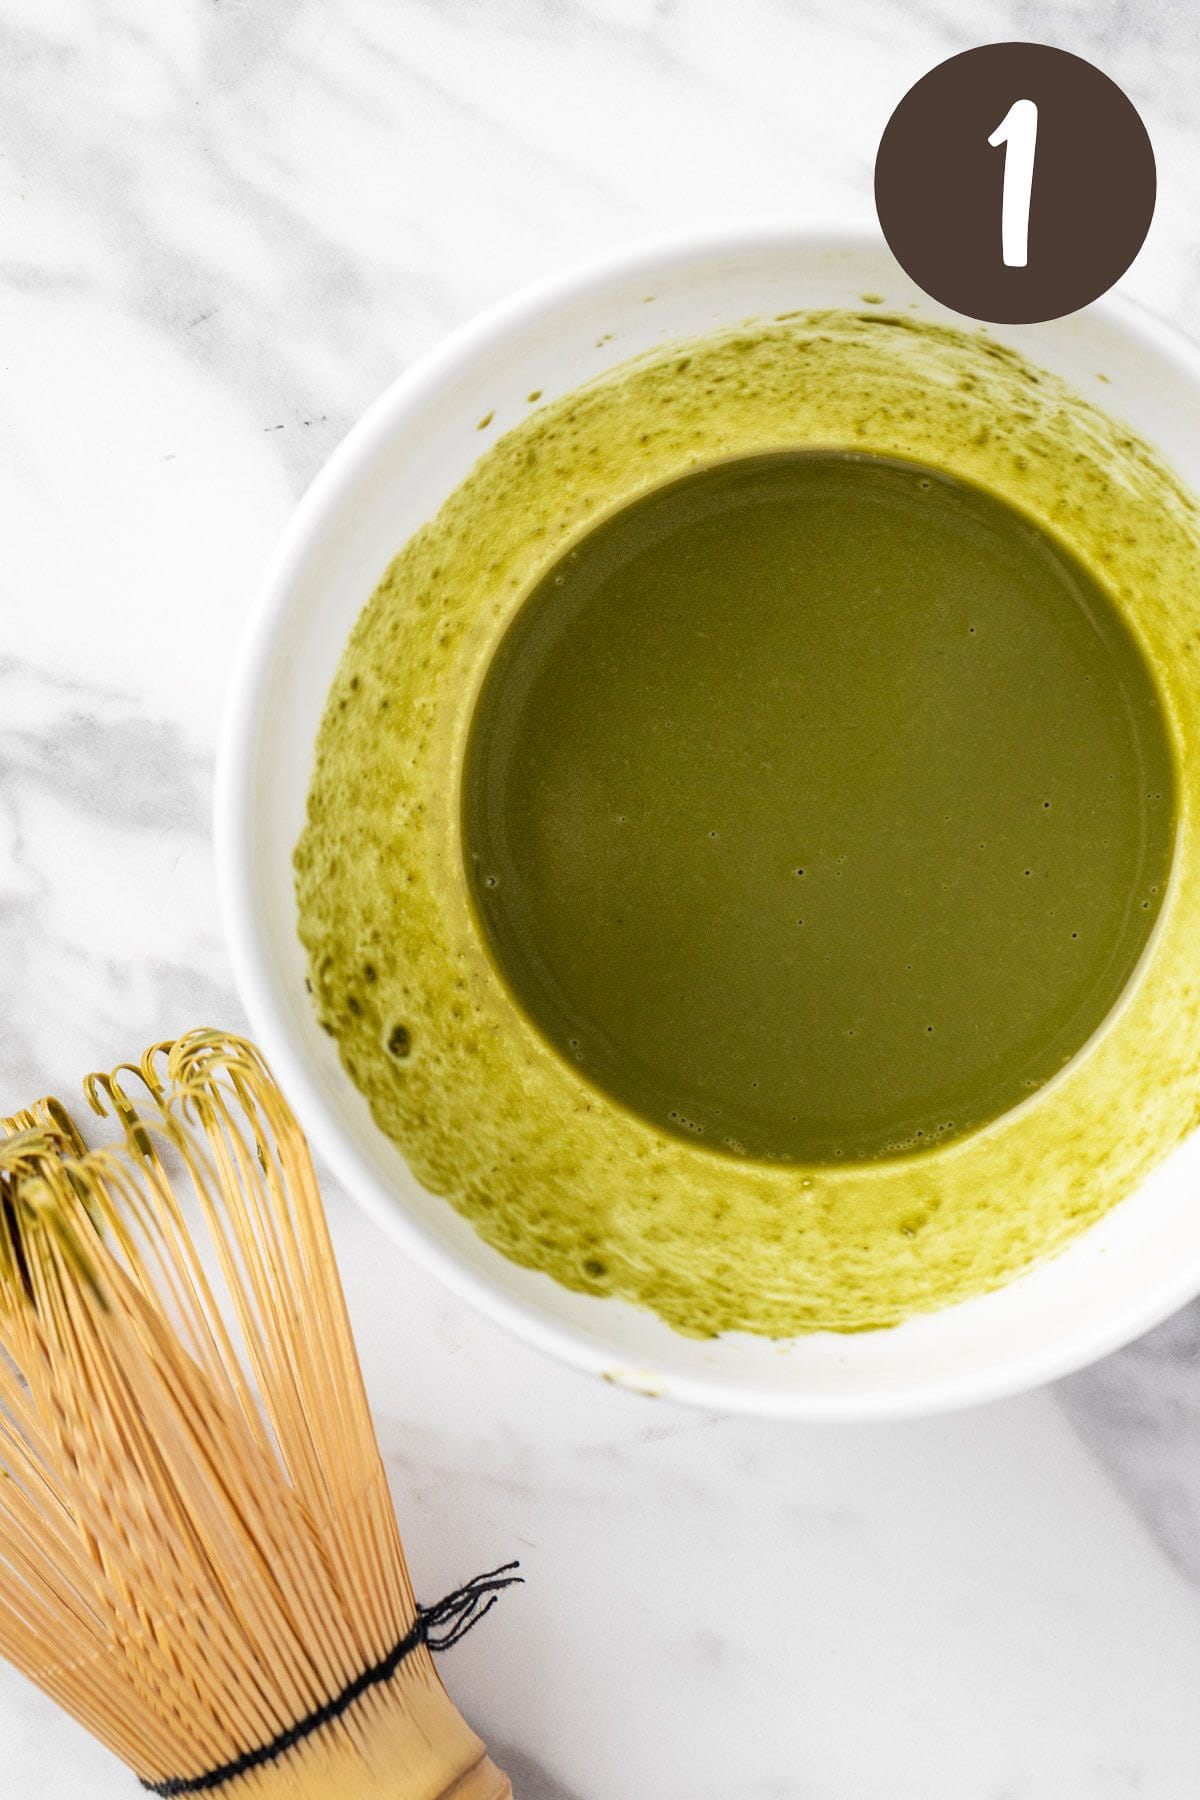 A process photo illustrating step 1: whisking the matcha powder and water together.